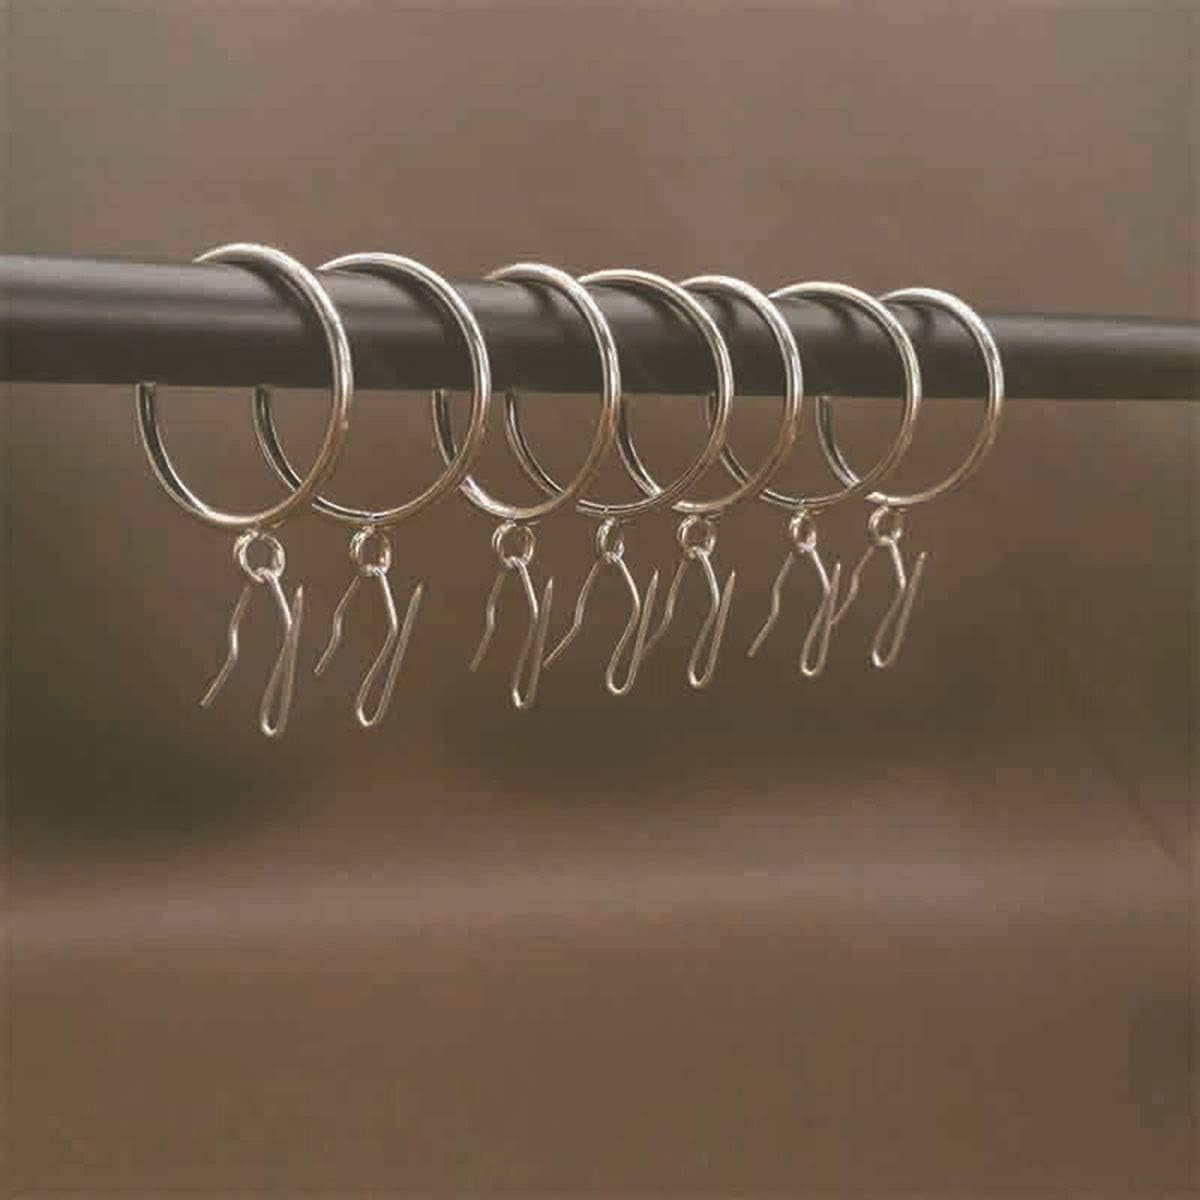 E-Outstanding 50 Sets White Plastic Traverse Rod Slides Rail Glider and Metal Curtain Hooks Window Curtain Accessories